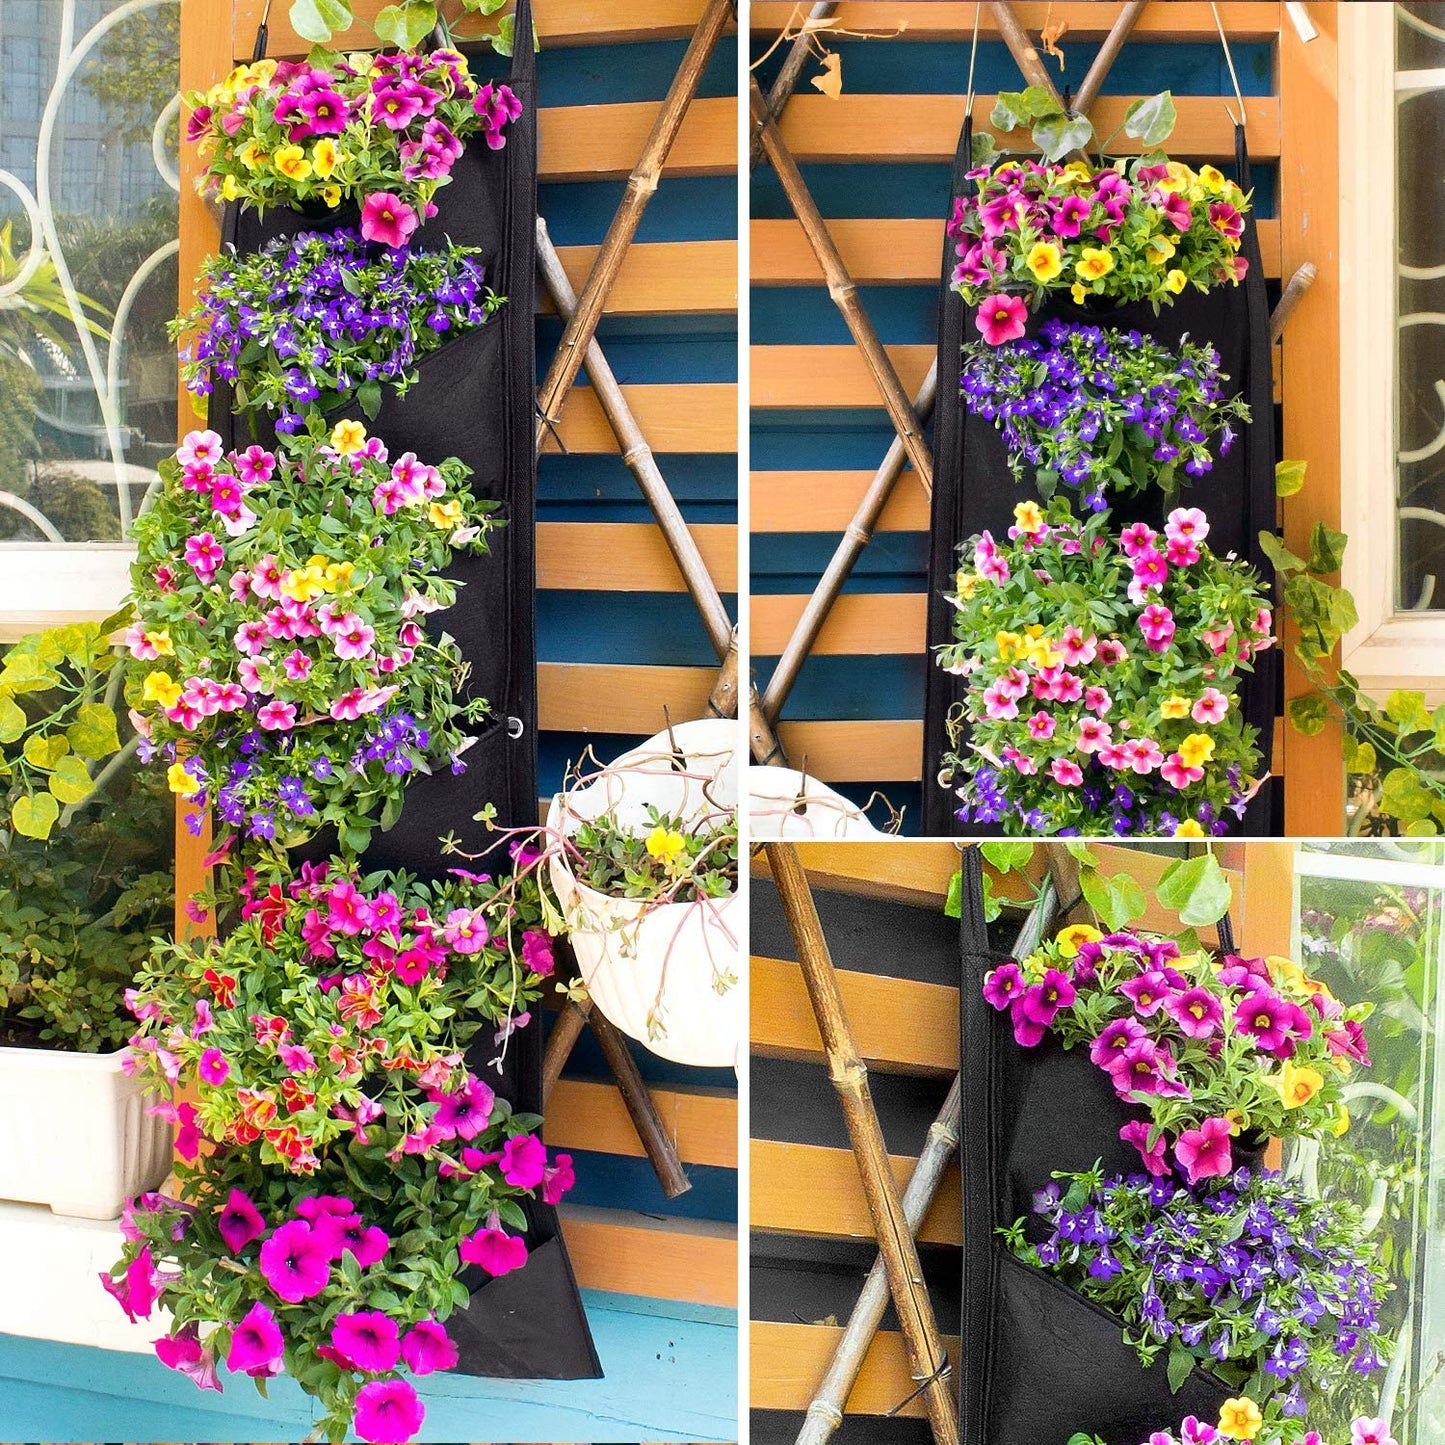 Hanging flower pots - Pure Daily Needs